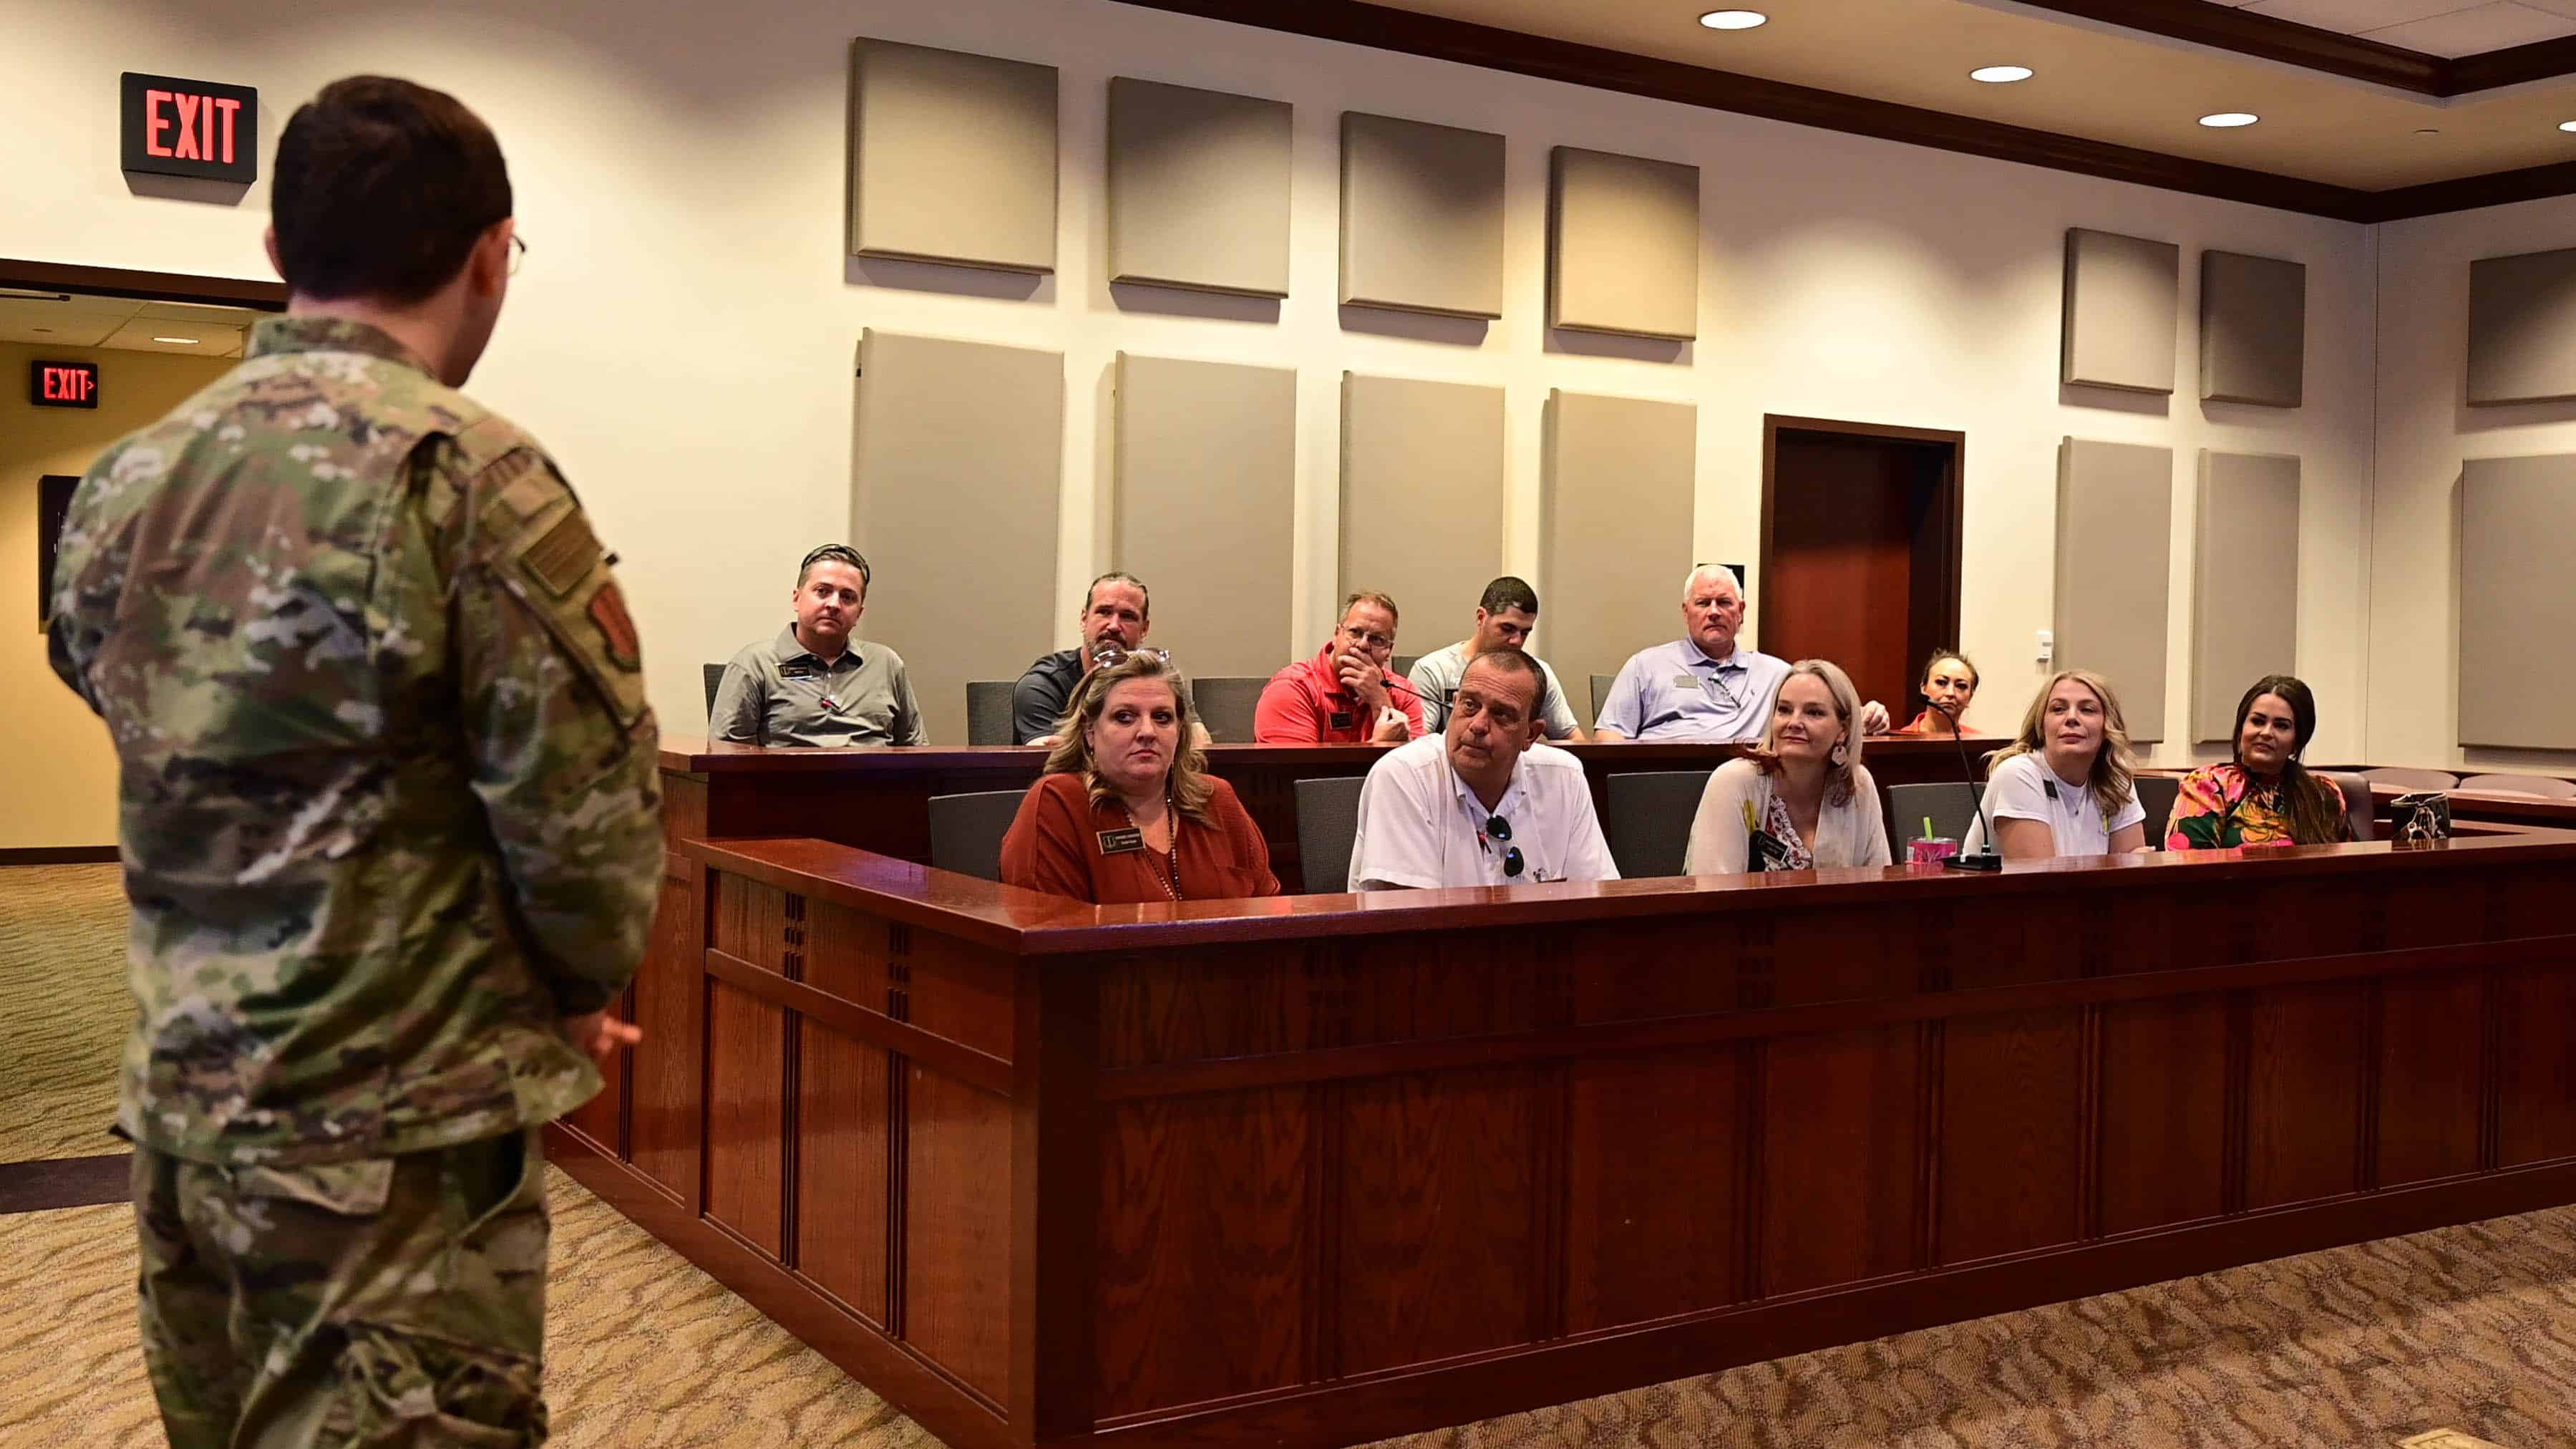 17th Training Wing honorary commanders act as a jury during a mock trial at Goodfellow Air Force Base, Texas, Aug 30, 2023. Honorary Commanders acted as the jury of the mock trial to understand how violations of the Uniform Code of Military Justice are treated in a military-style court. (U.S. Air Force photo by Airman 1st Class Zach Heimbuch)